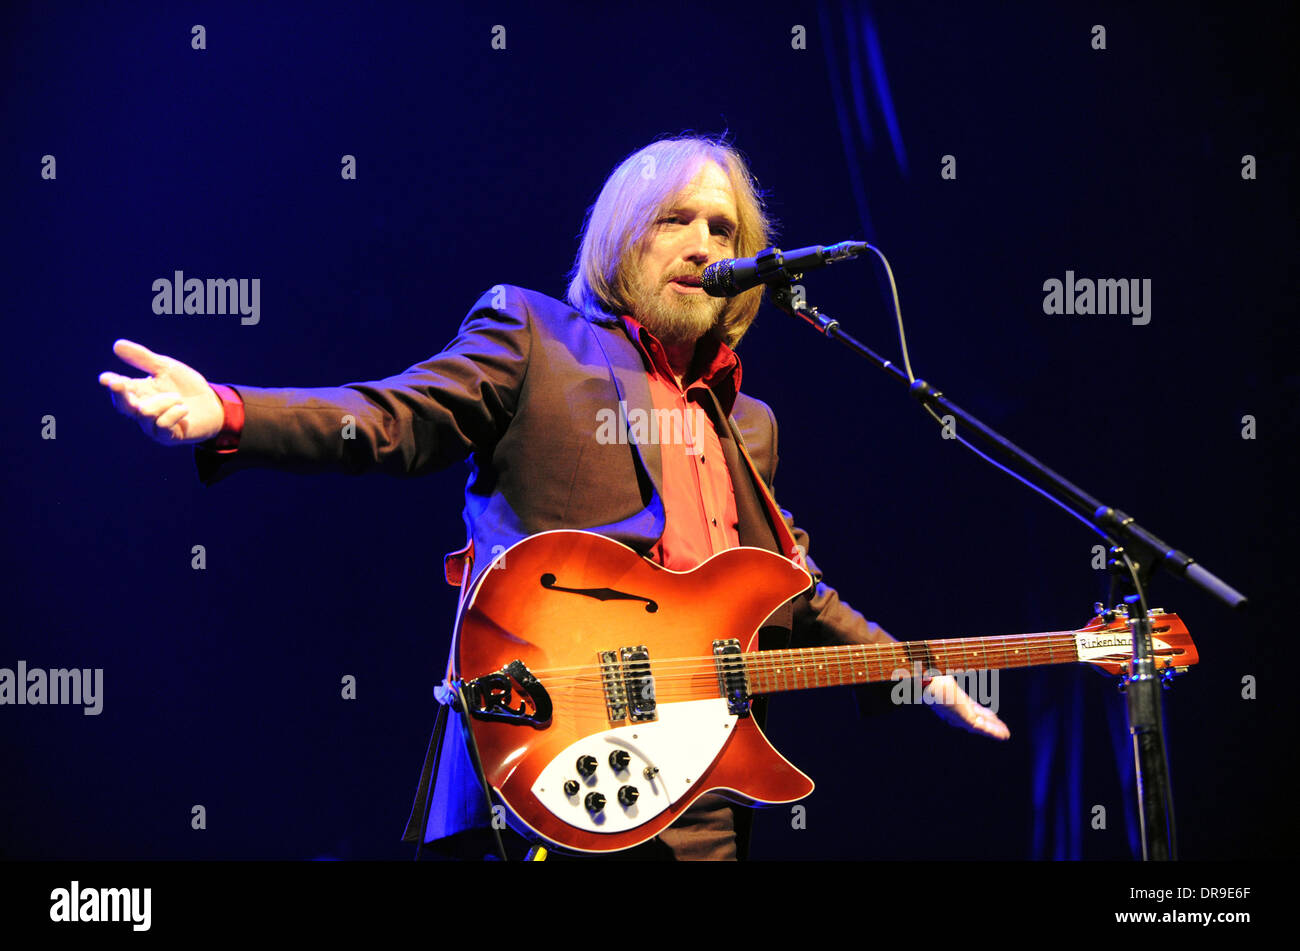 Tom Petty & the Heartbreakers performing at the Heineken Music Hall Amsterdam, Holland - 24.06.12 Stock Photo